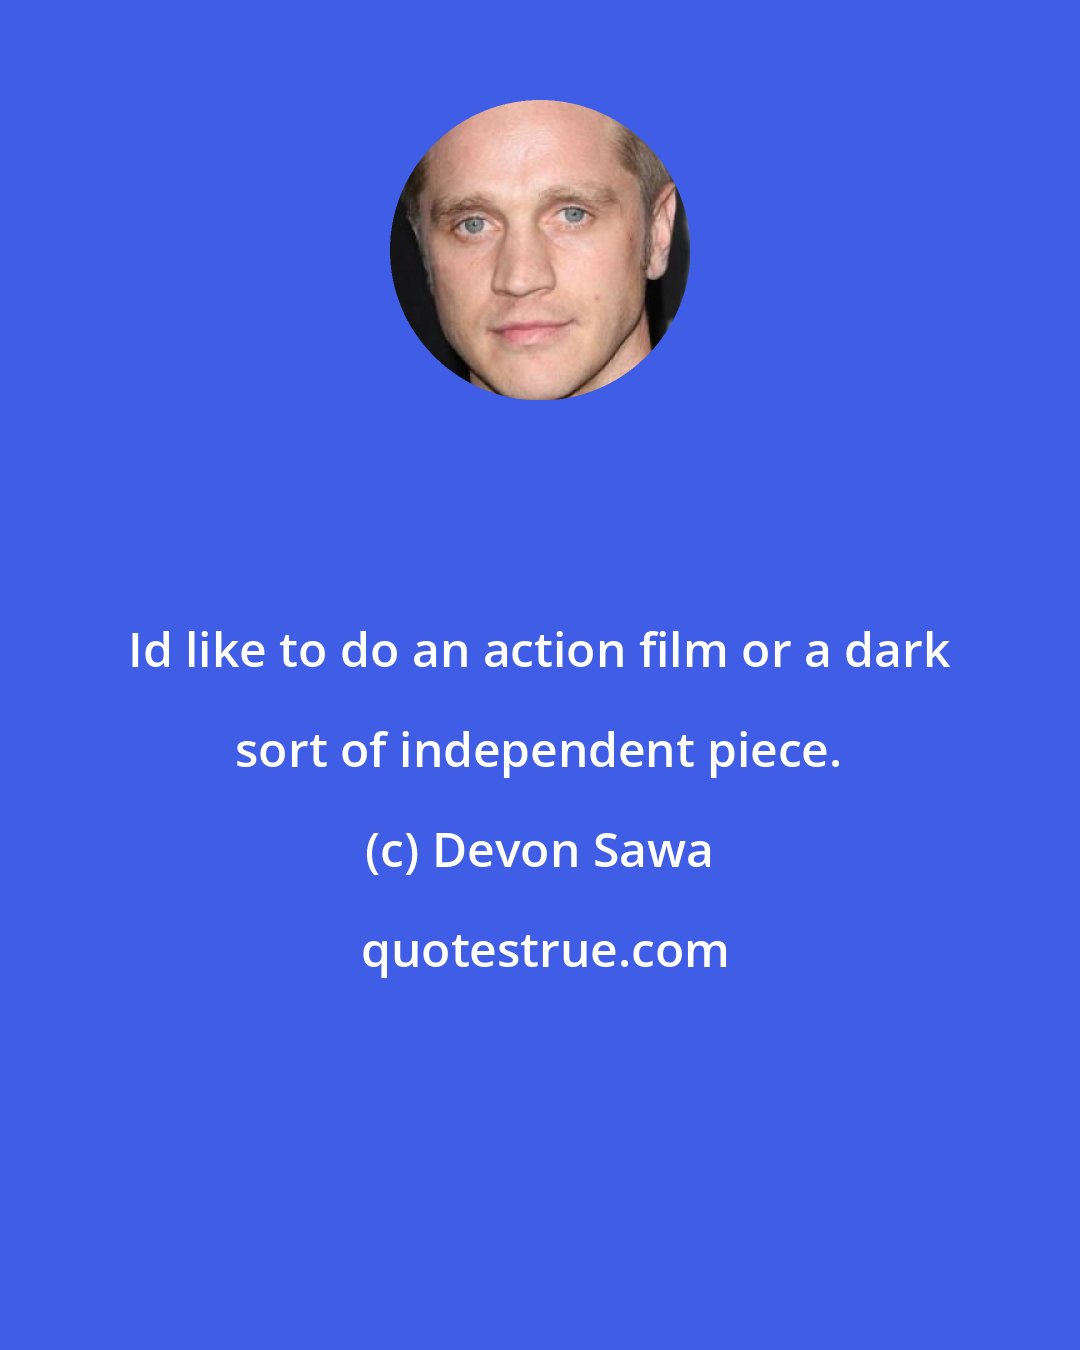 Devon Sawa: Id like to do an action film or a dark sort of independent piece.